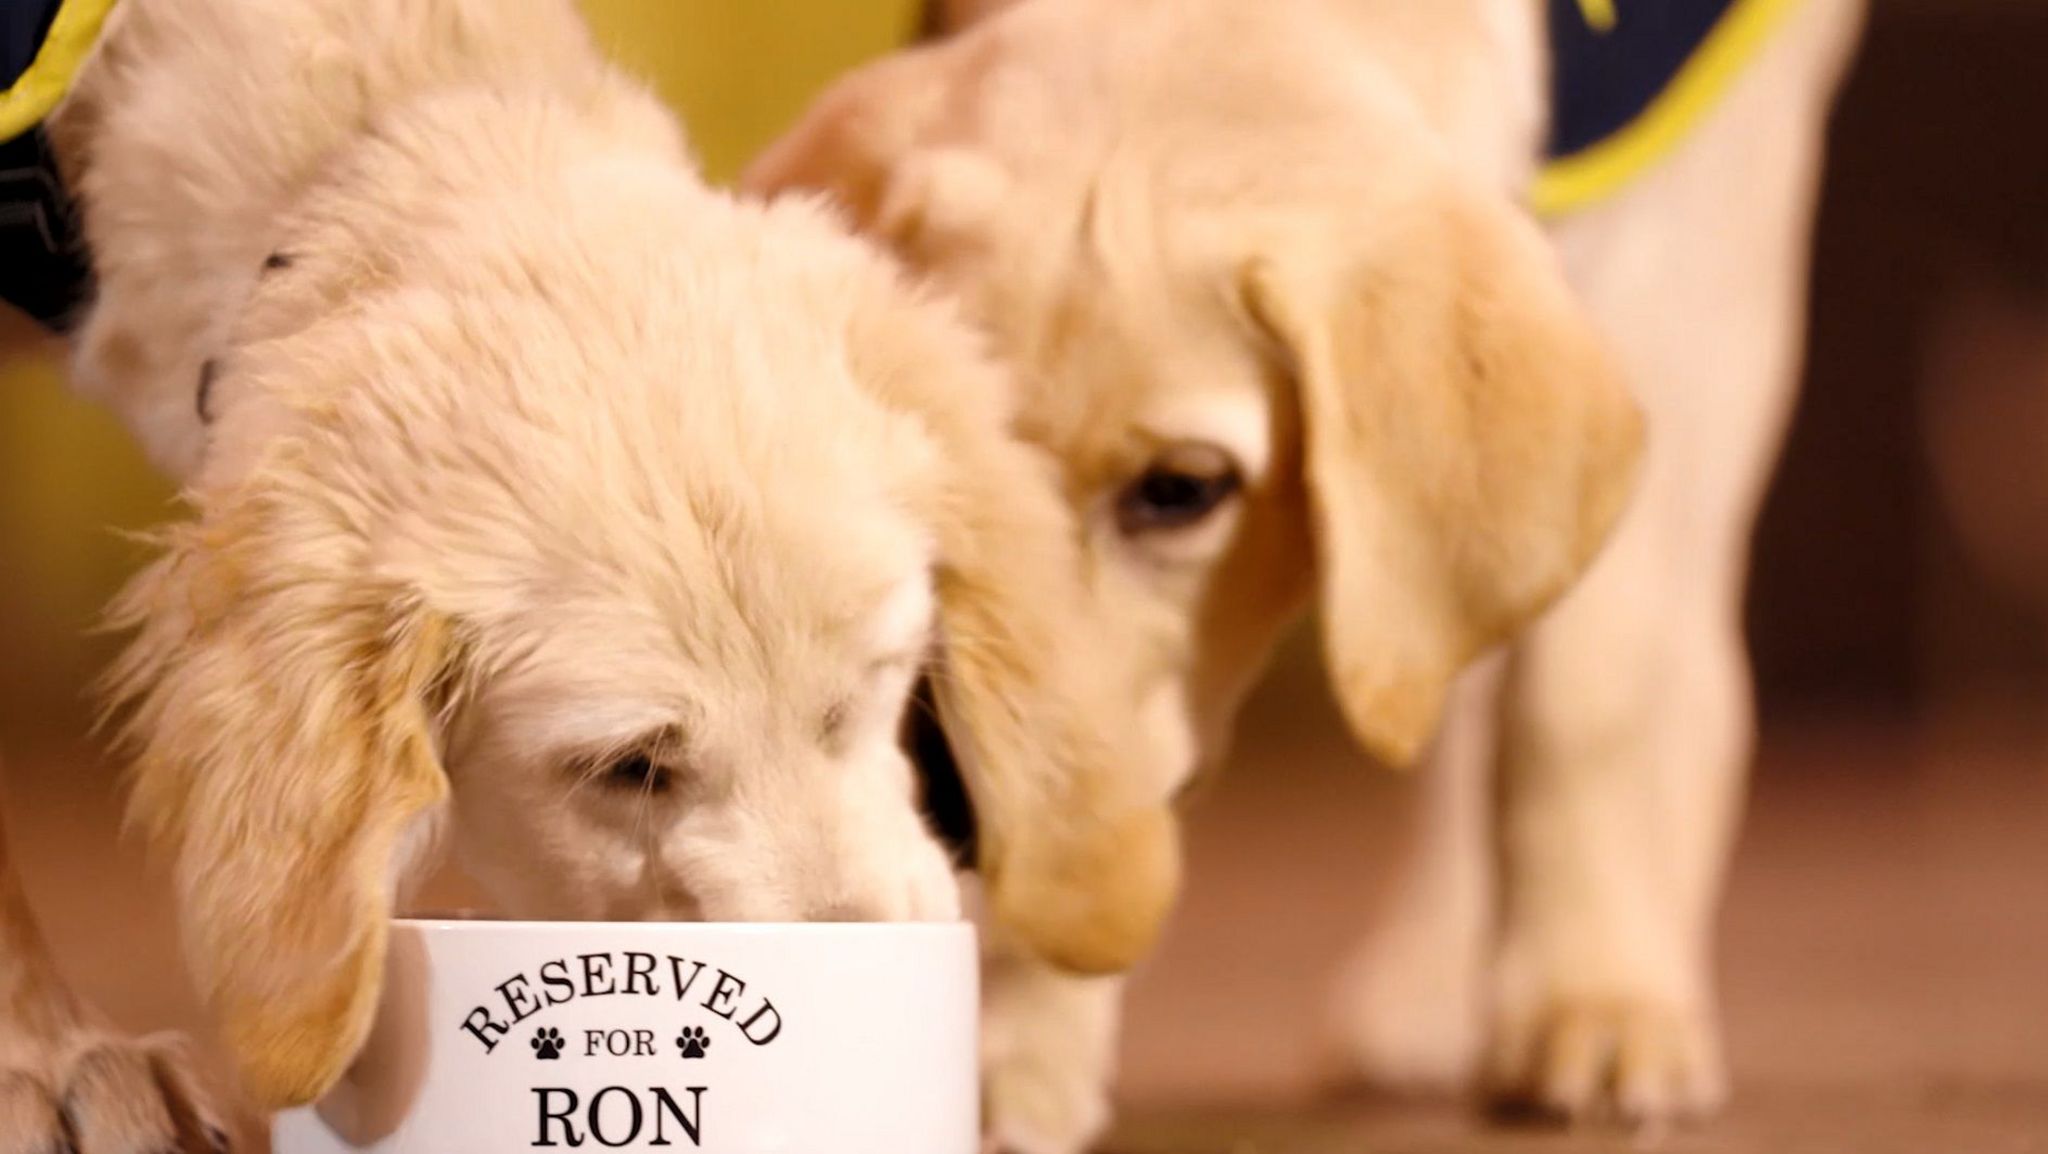 Two guide dogs, labradors, trying to share bowl of food which has "reserved for Ron" written on it